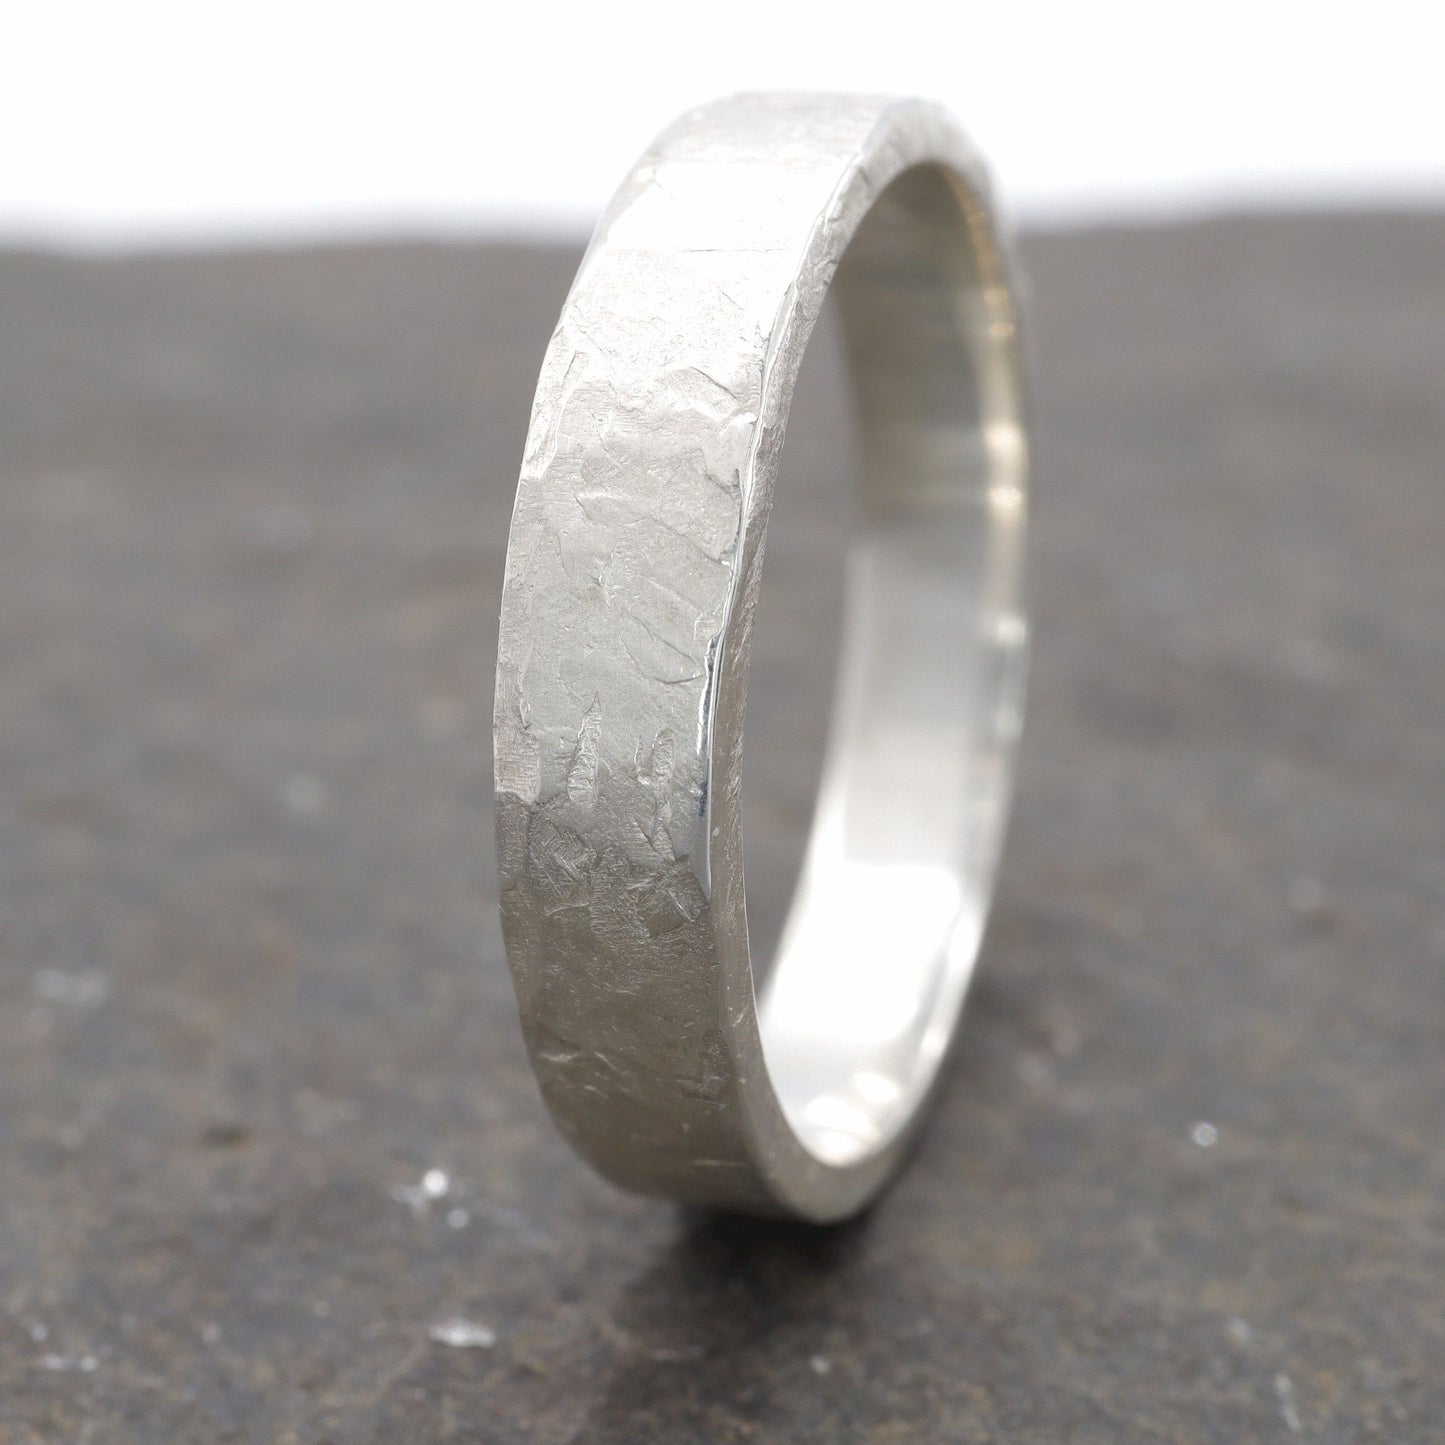 Silver thin wedding ring - rustic flat hammered textured band - Windermere design.